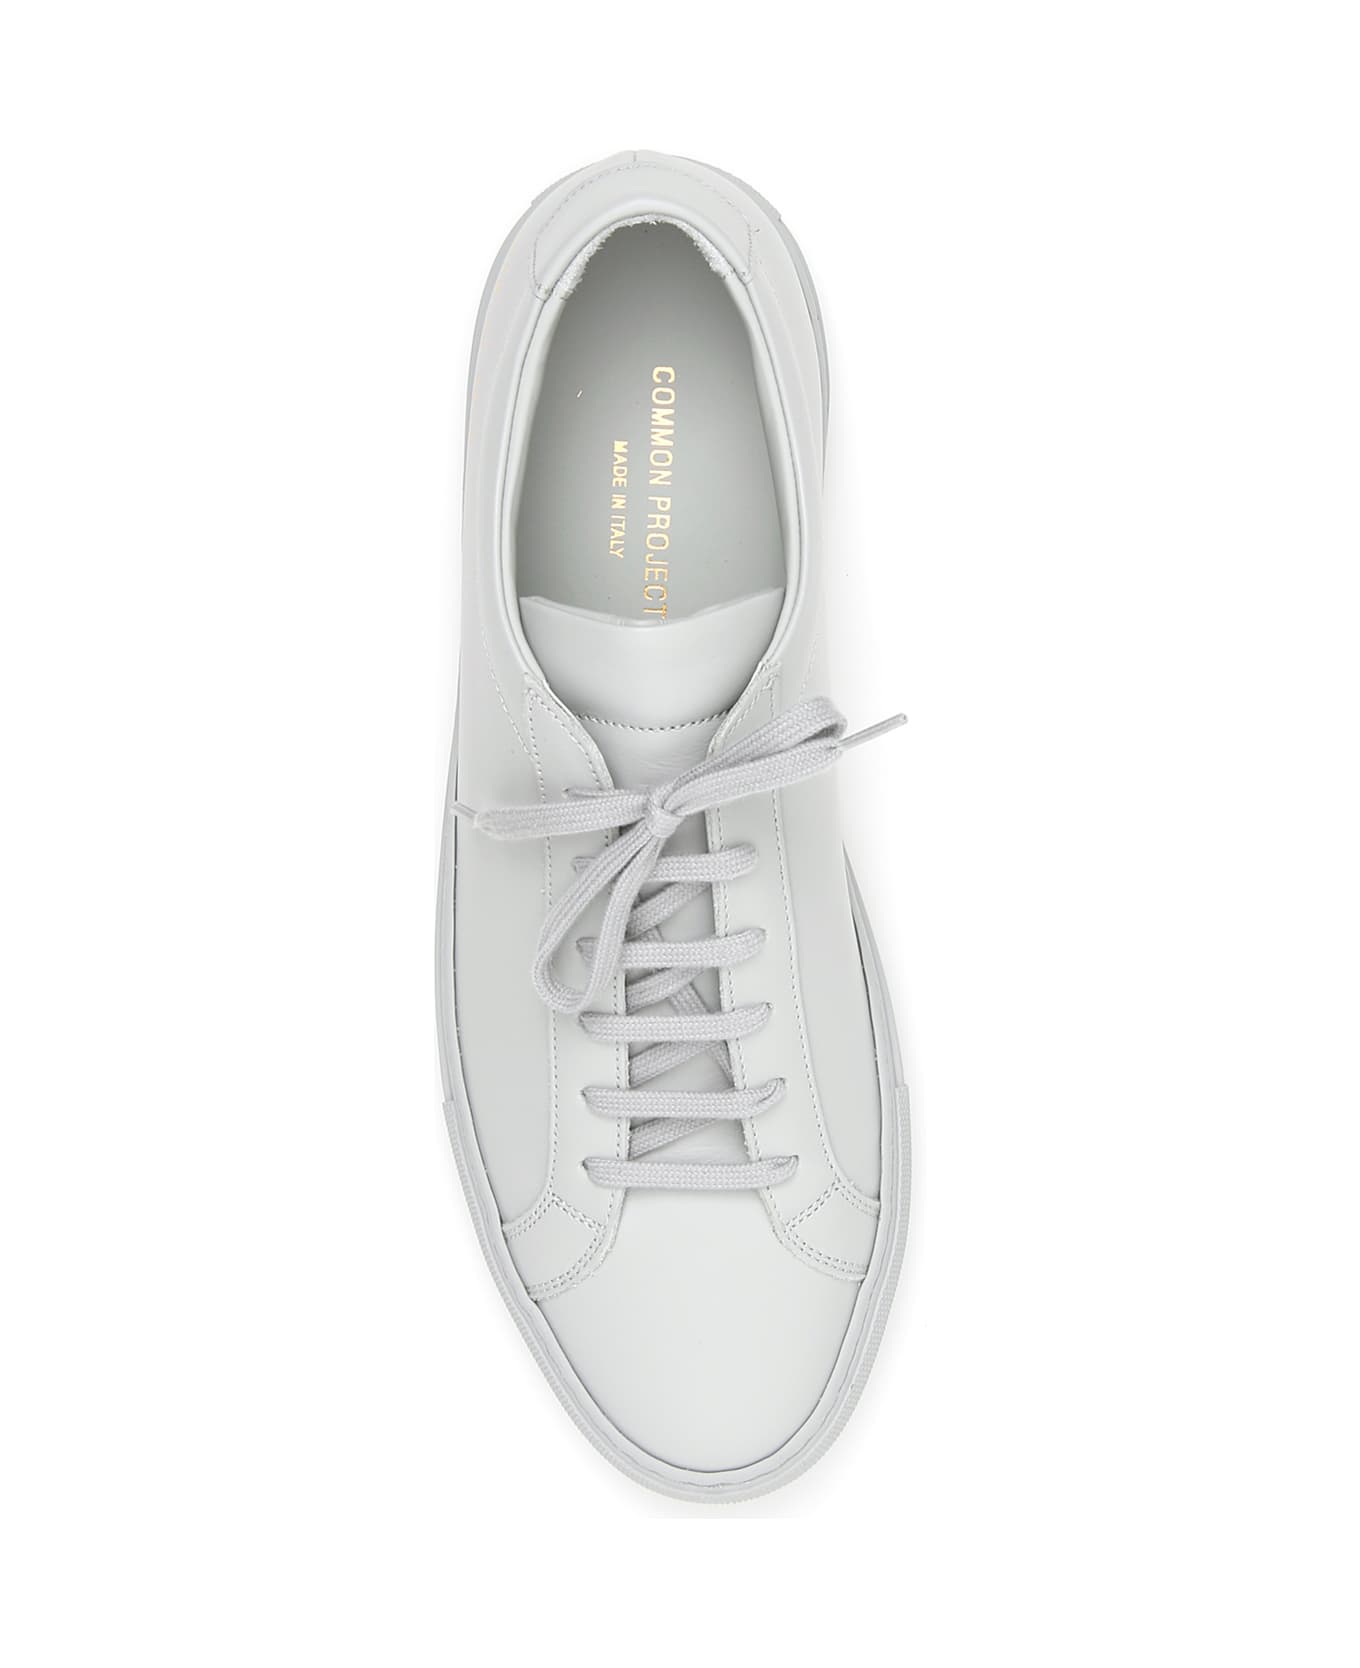 Common Projects Achilles Low Sneakers In Grey Leather - Grey スニーカー